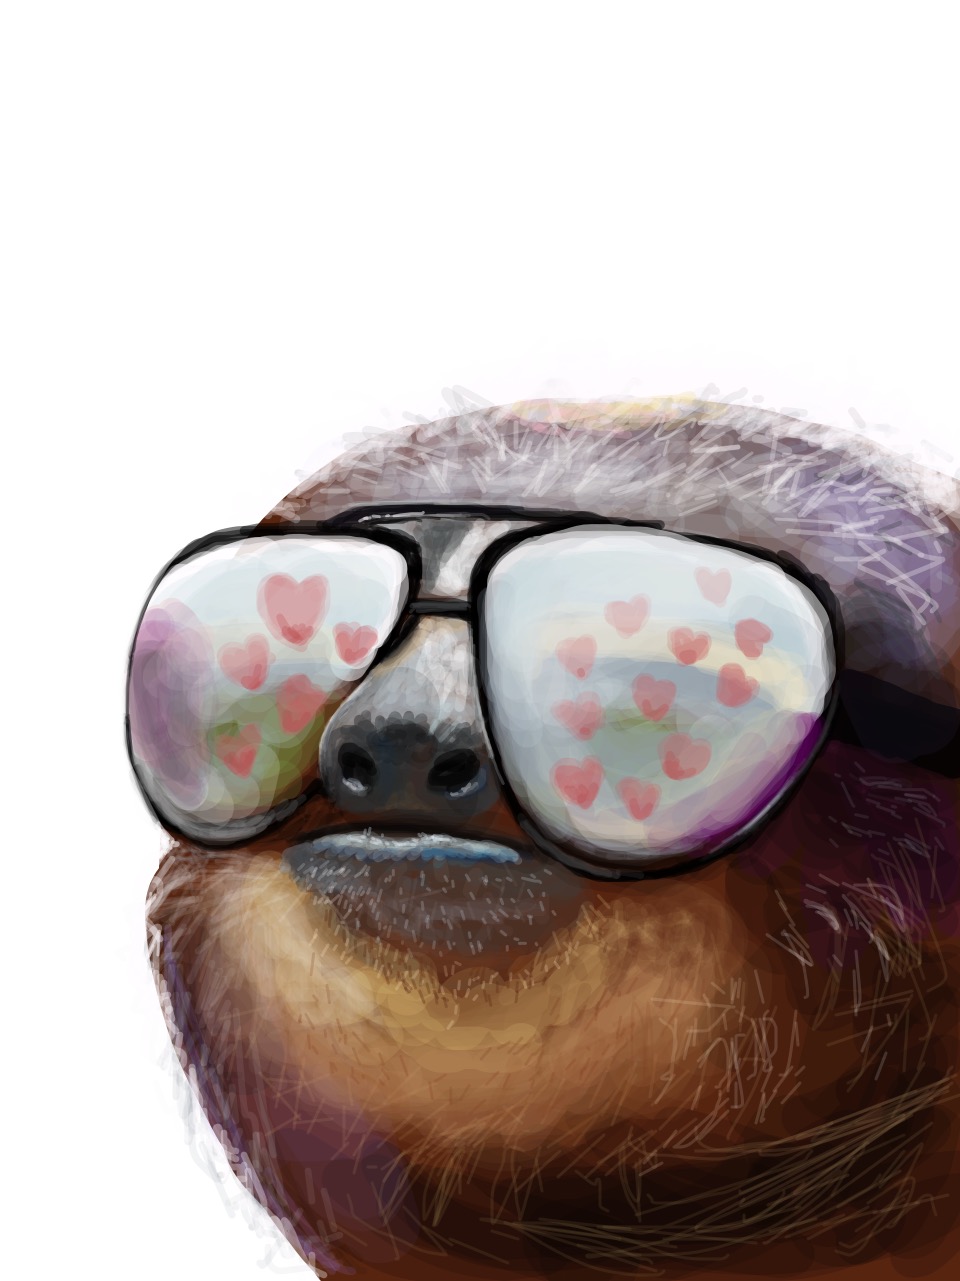 A reproduction of the sloth wearing sunglasses meme picture.